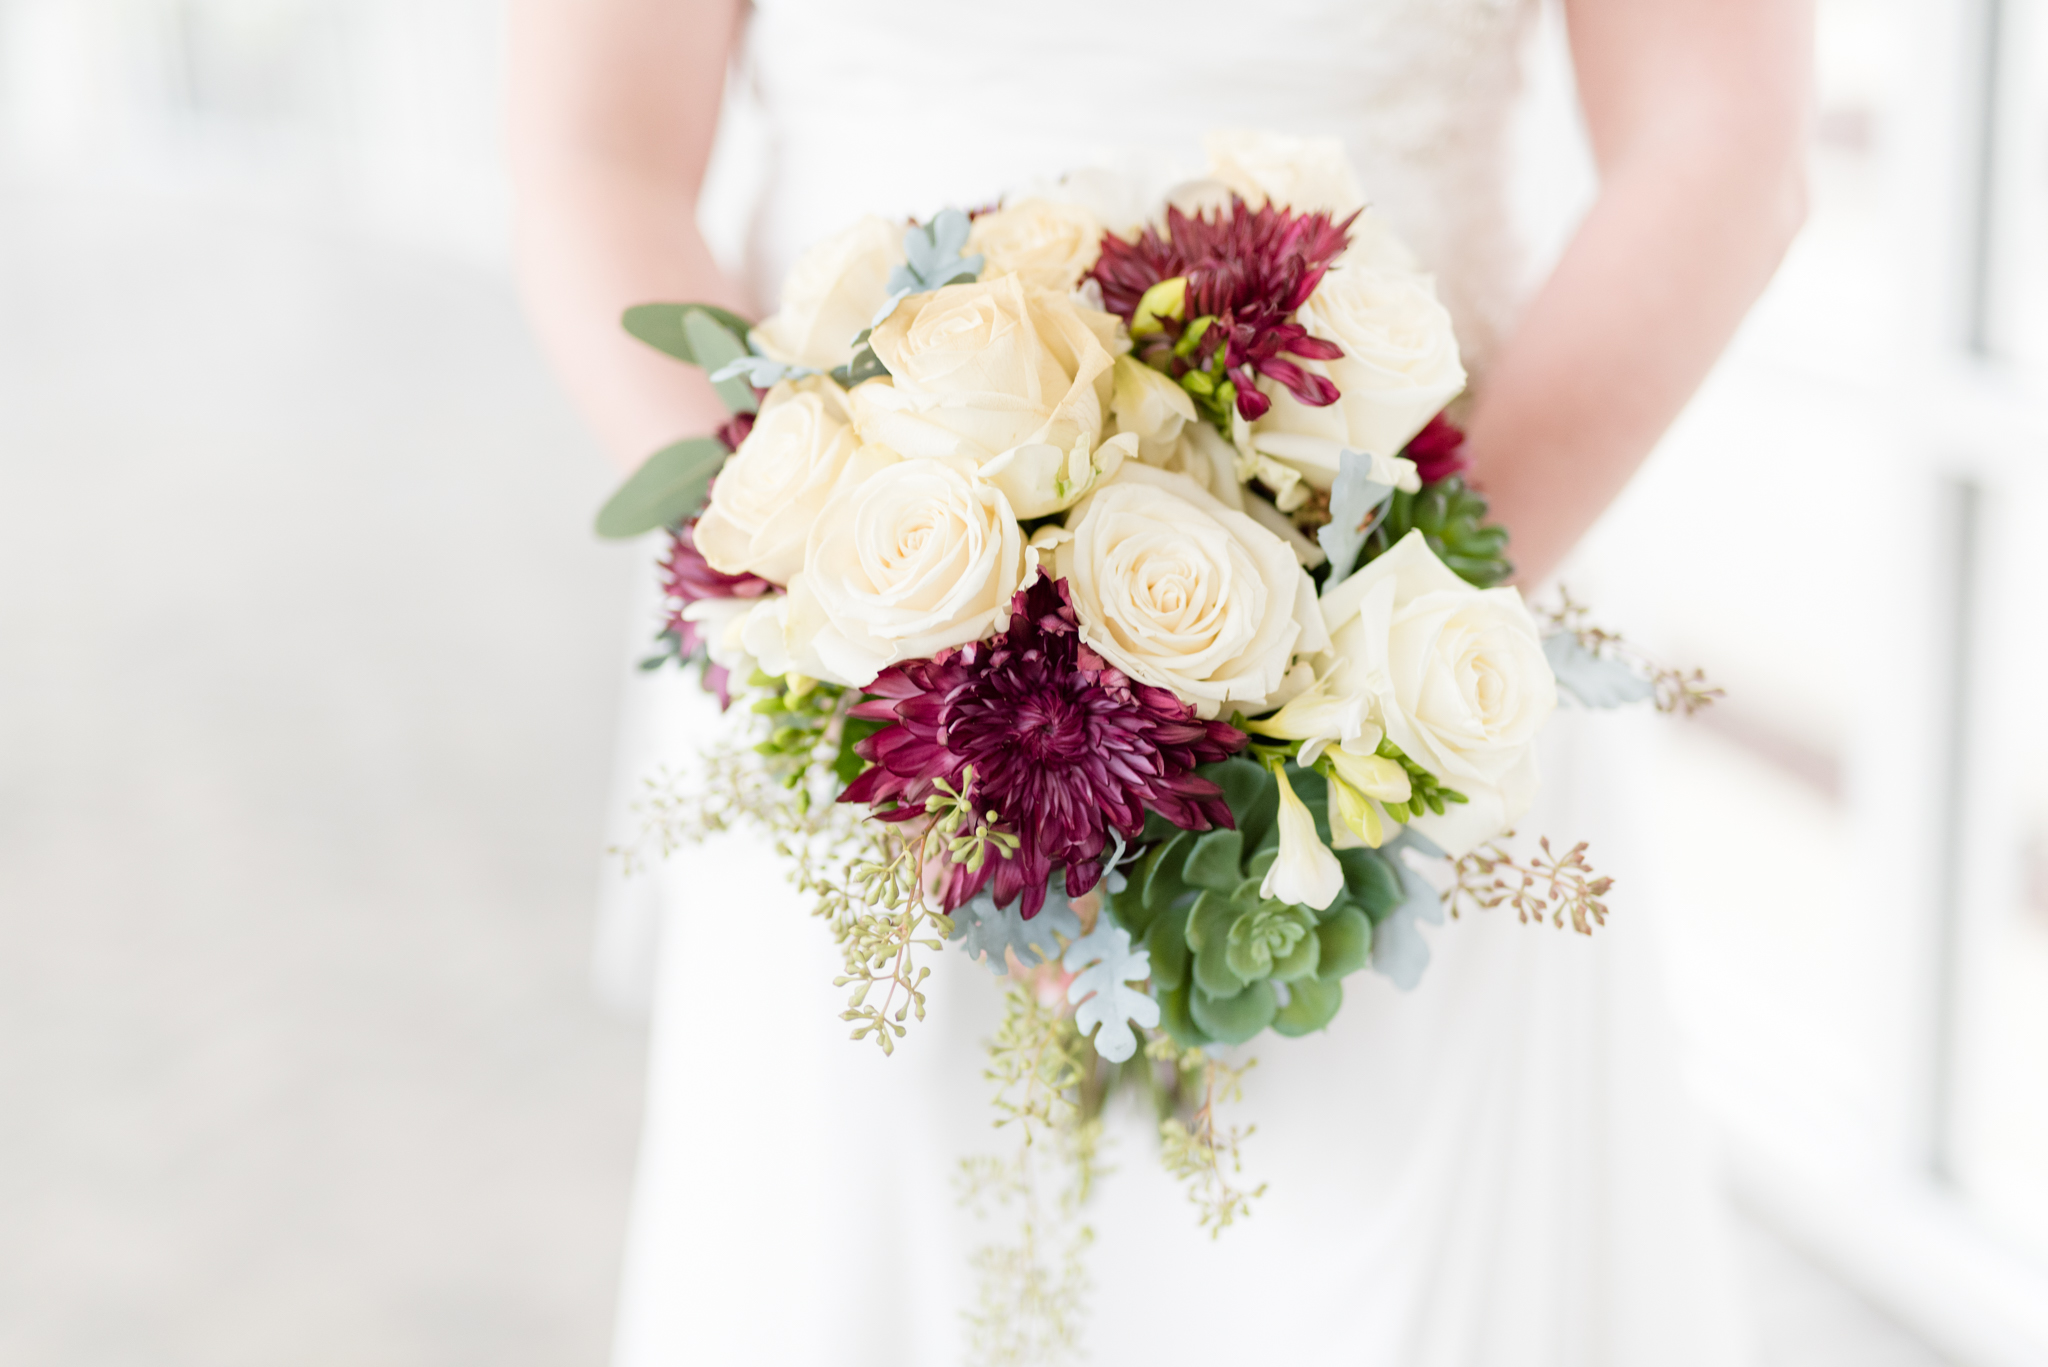 Bridal bouquet with purple and cream flowers.